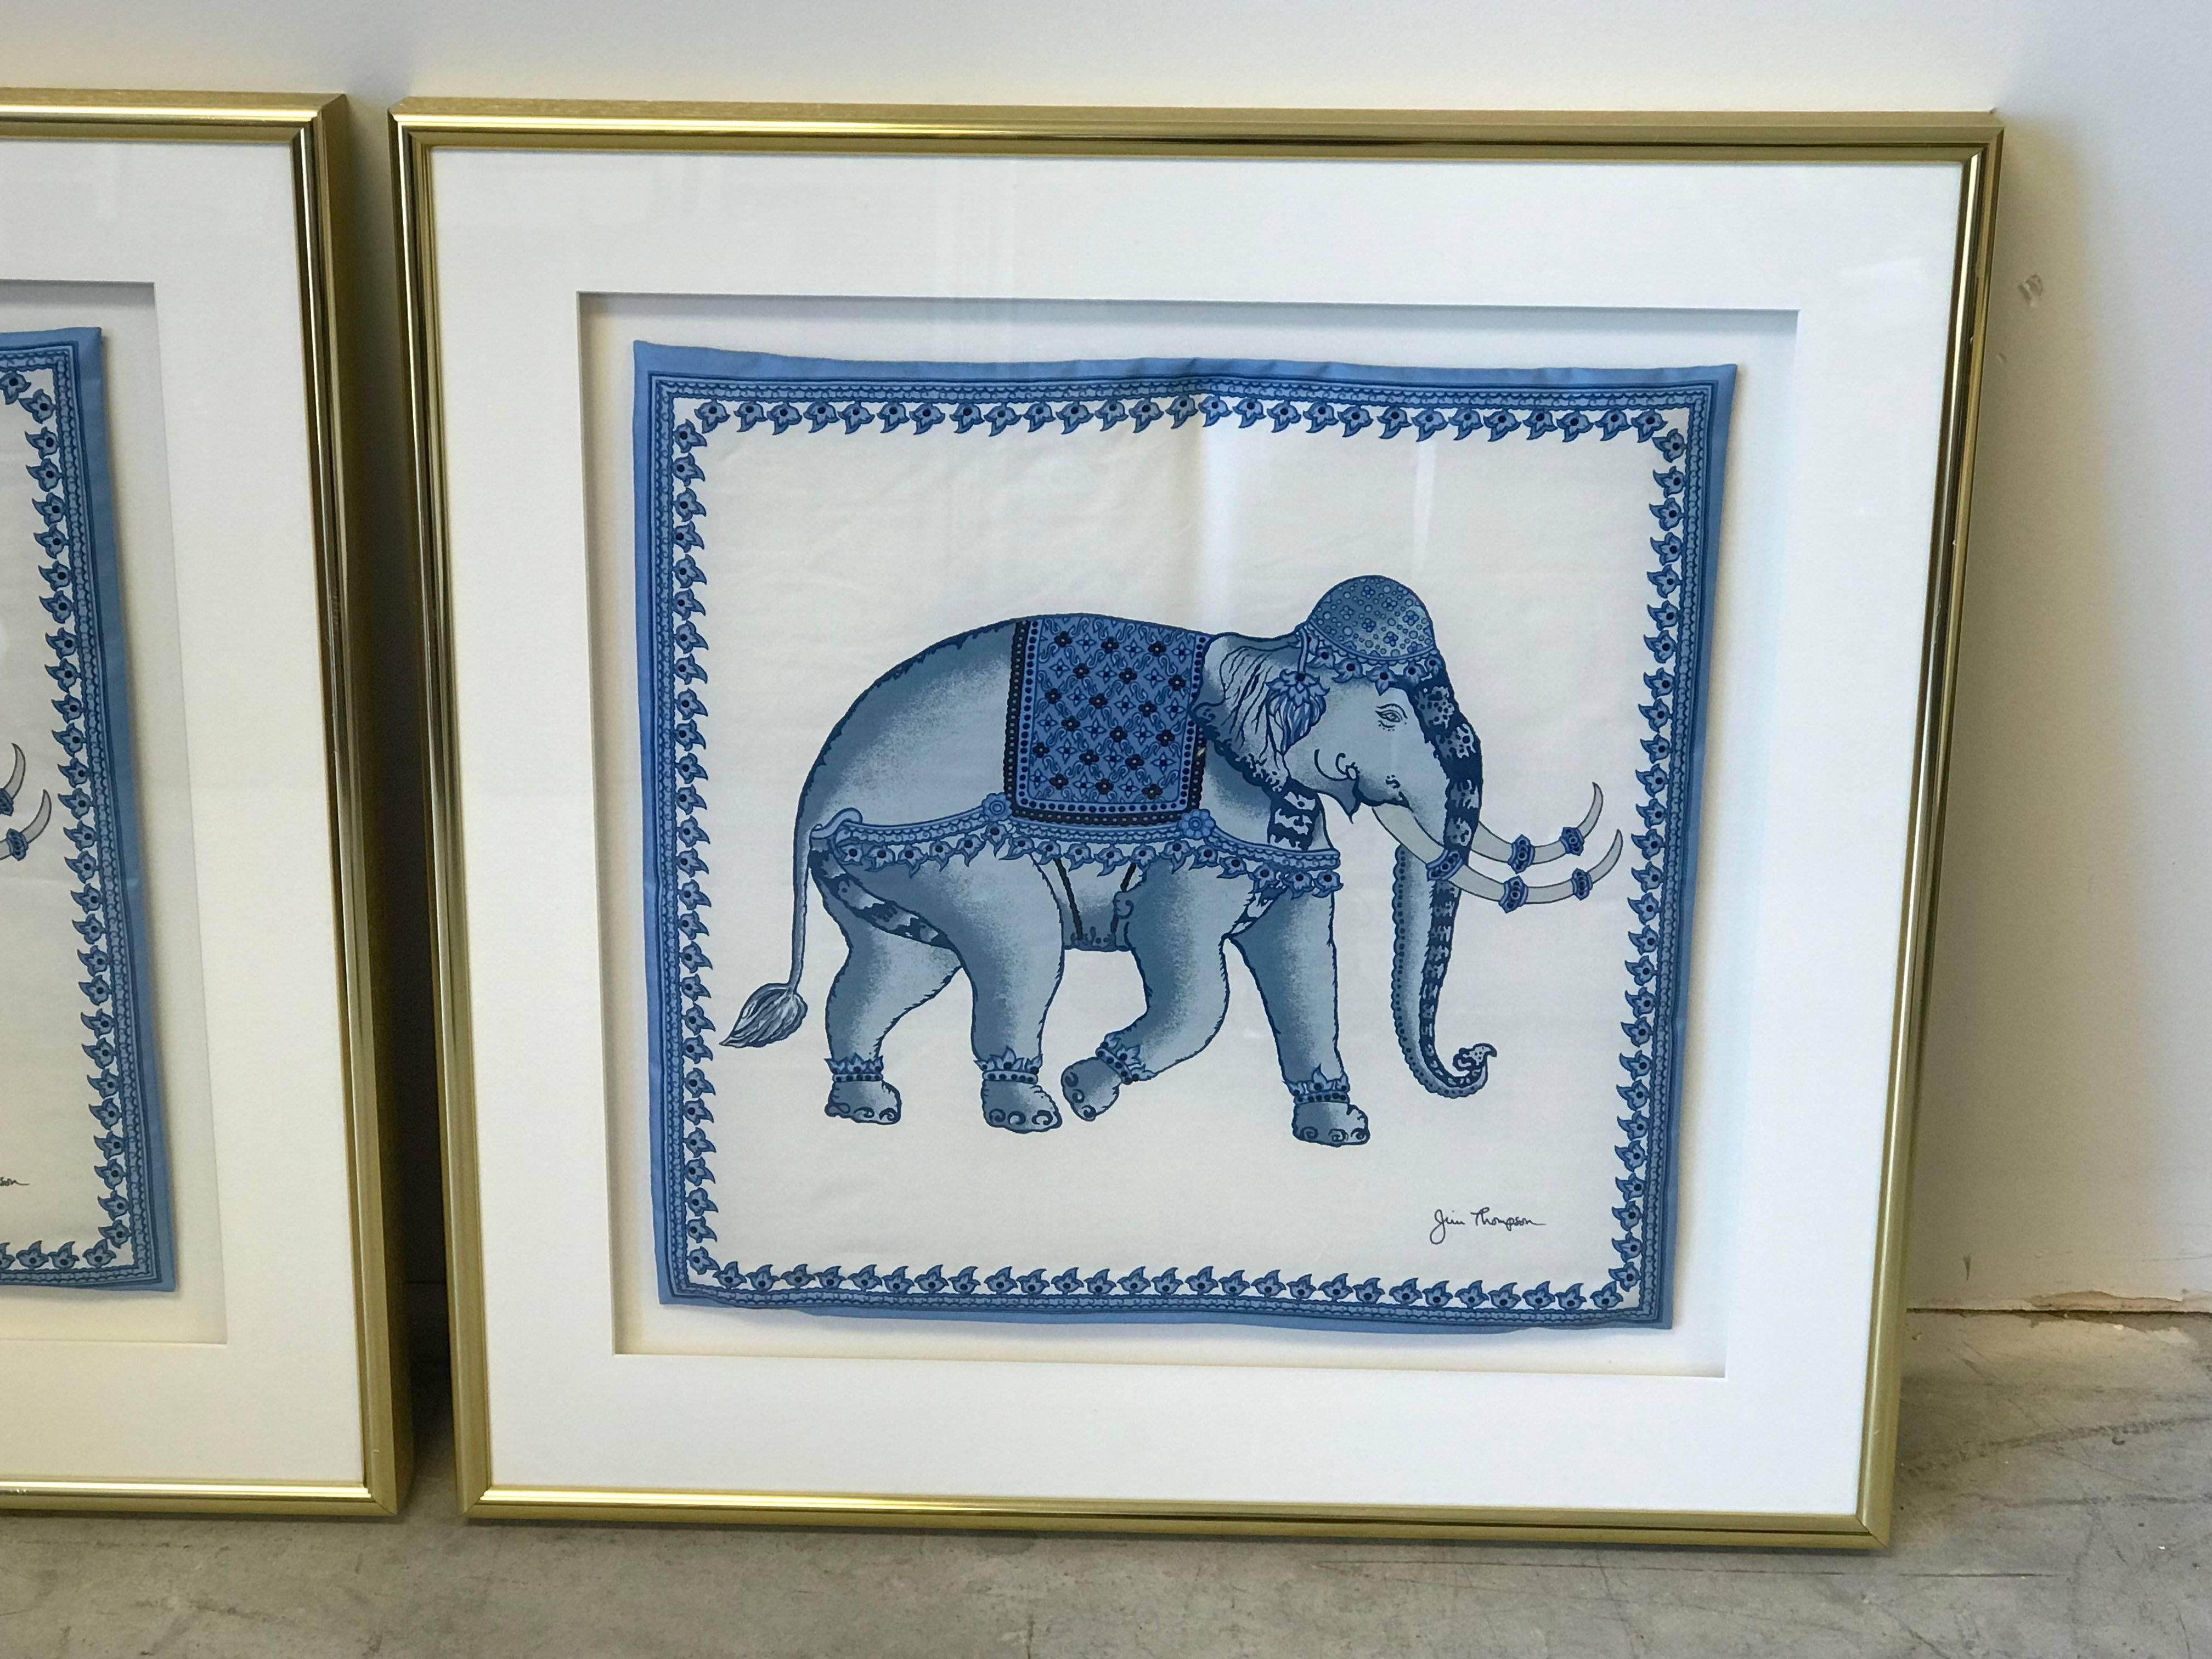 Offered is a stunning, pair of 1980s Jim Thompson framed pillow cases. The pair has a lovely, identical blue and white elephant on each. Professionally framed.